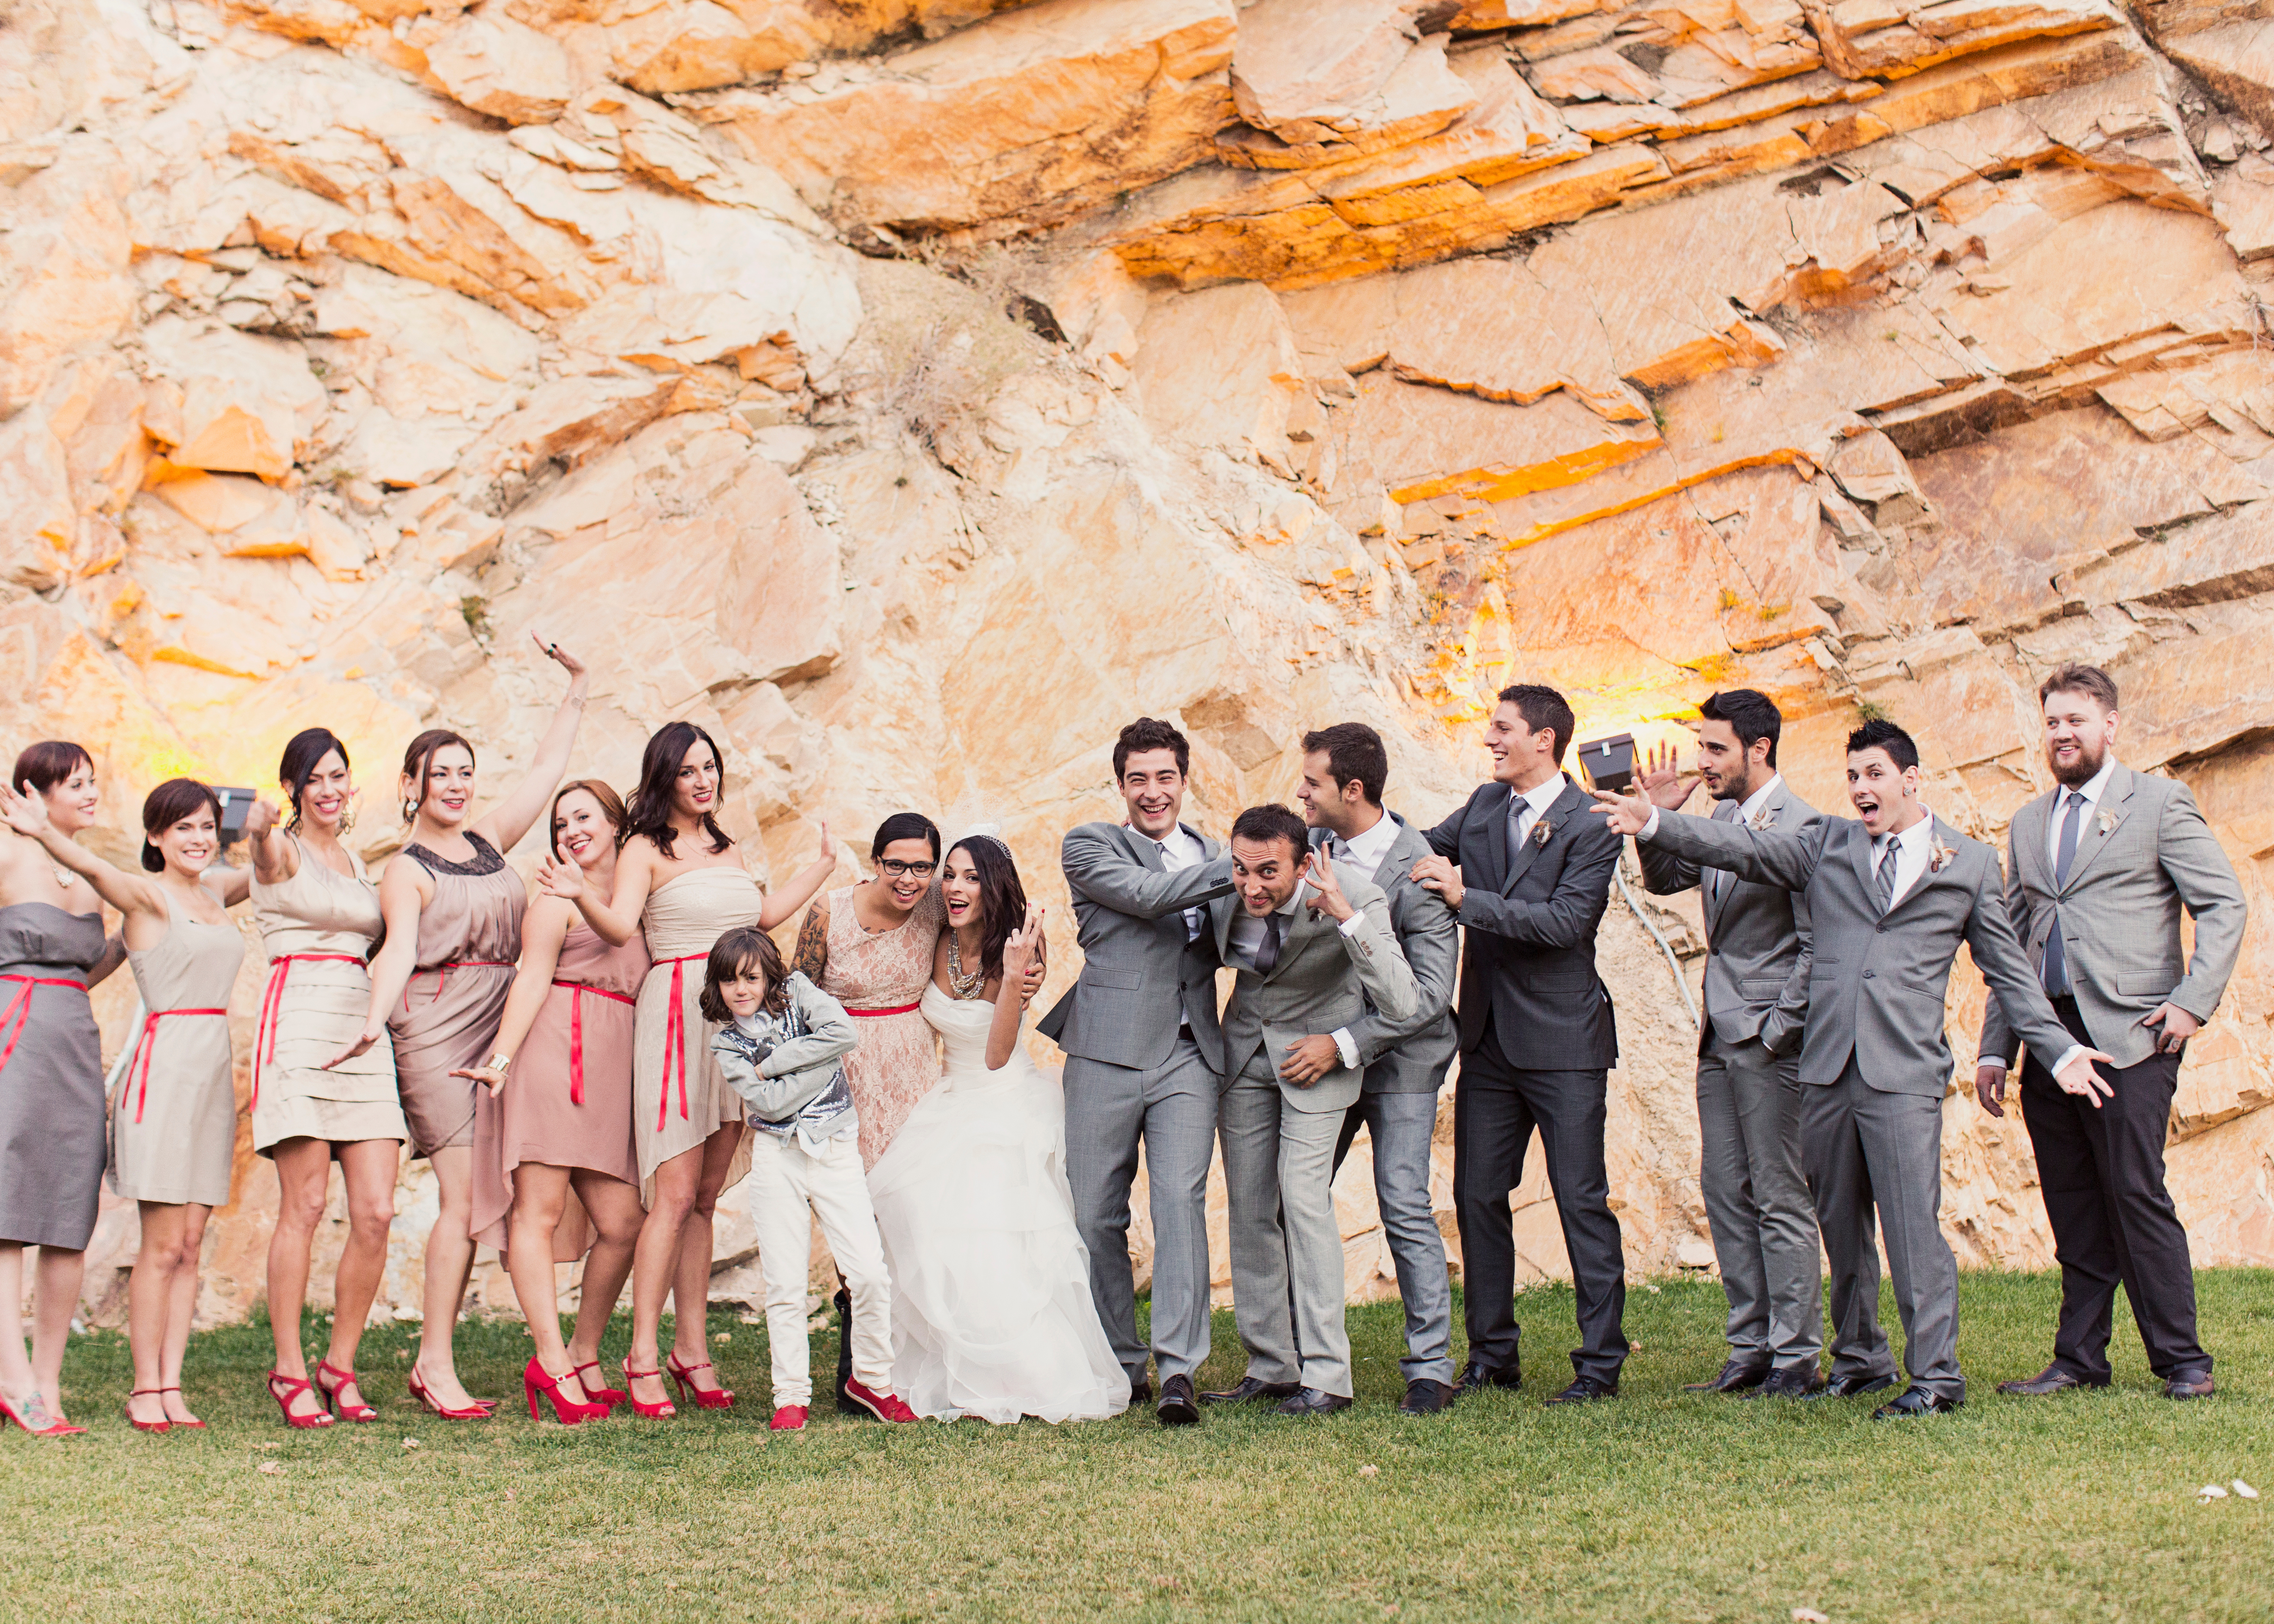 Bridal Party And Groomsmen Having A Laugh